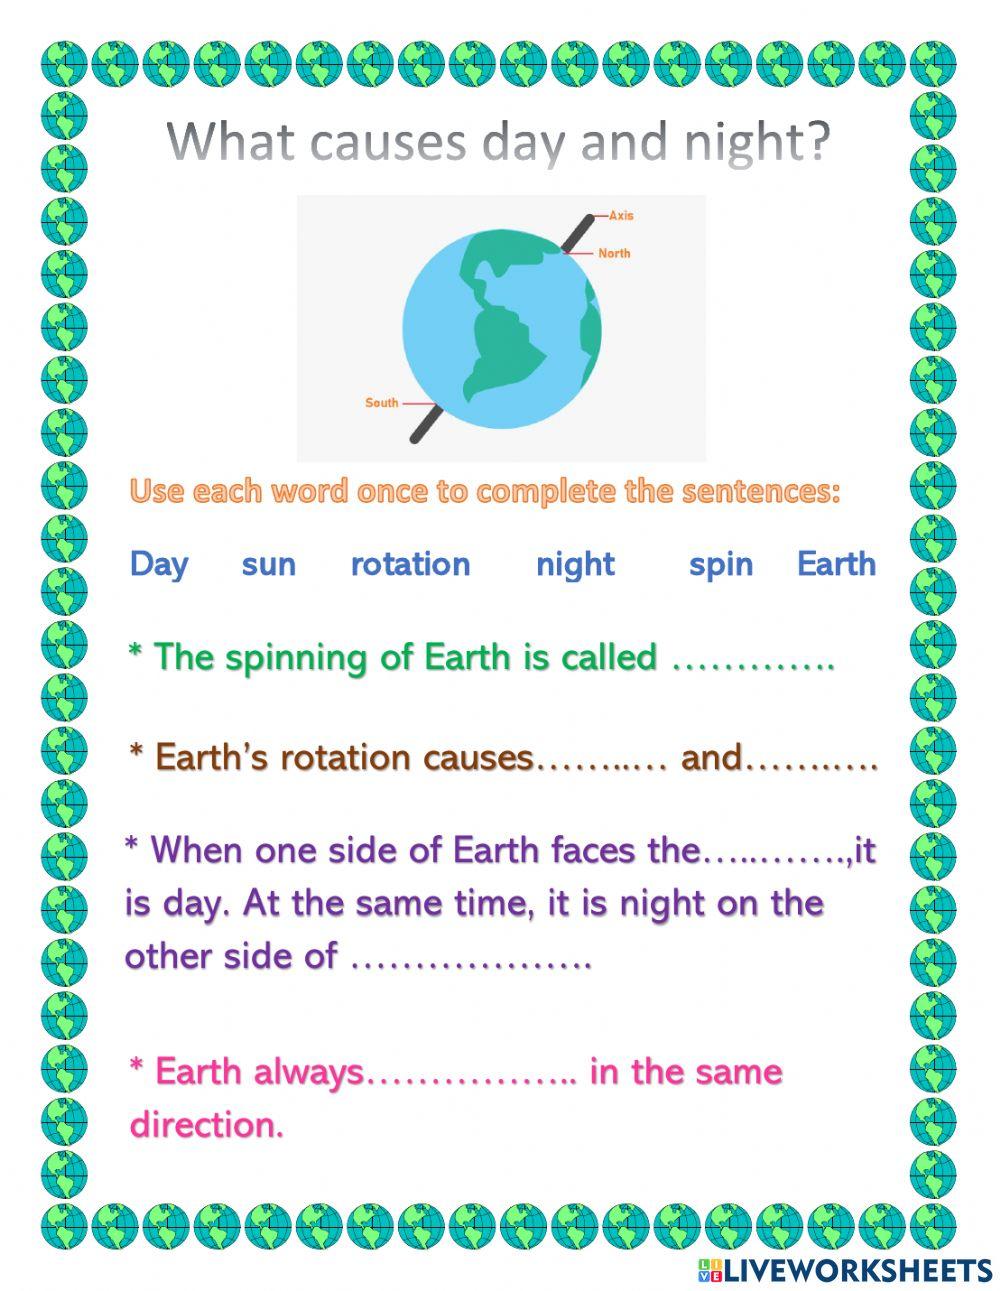 What causes day and night